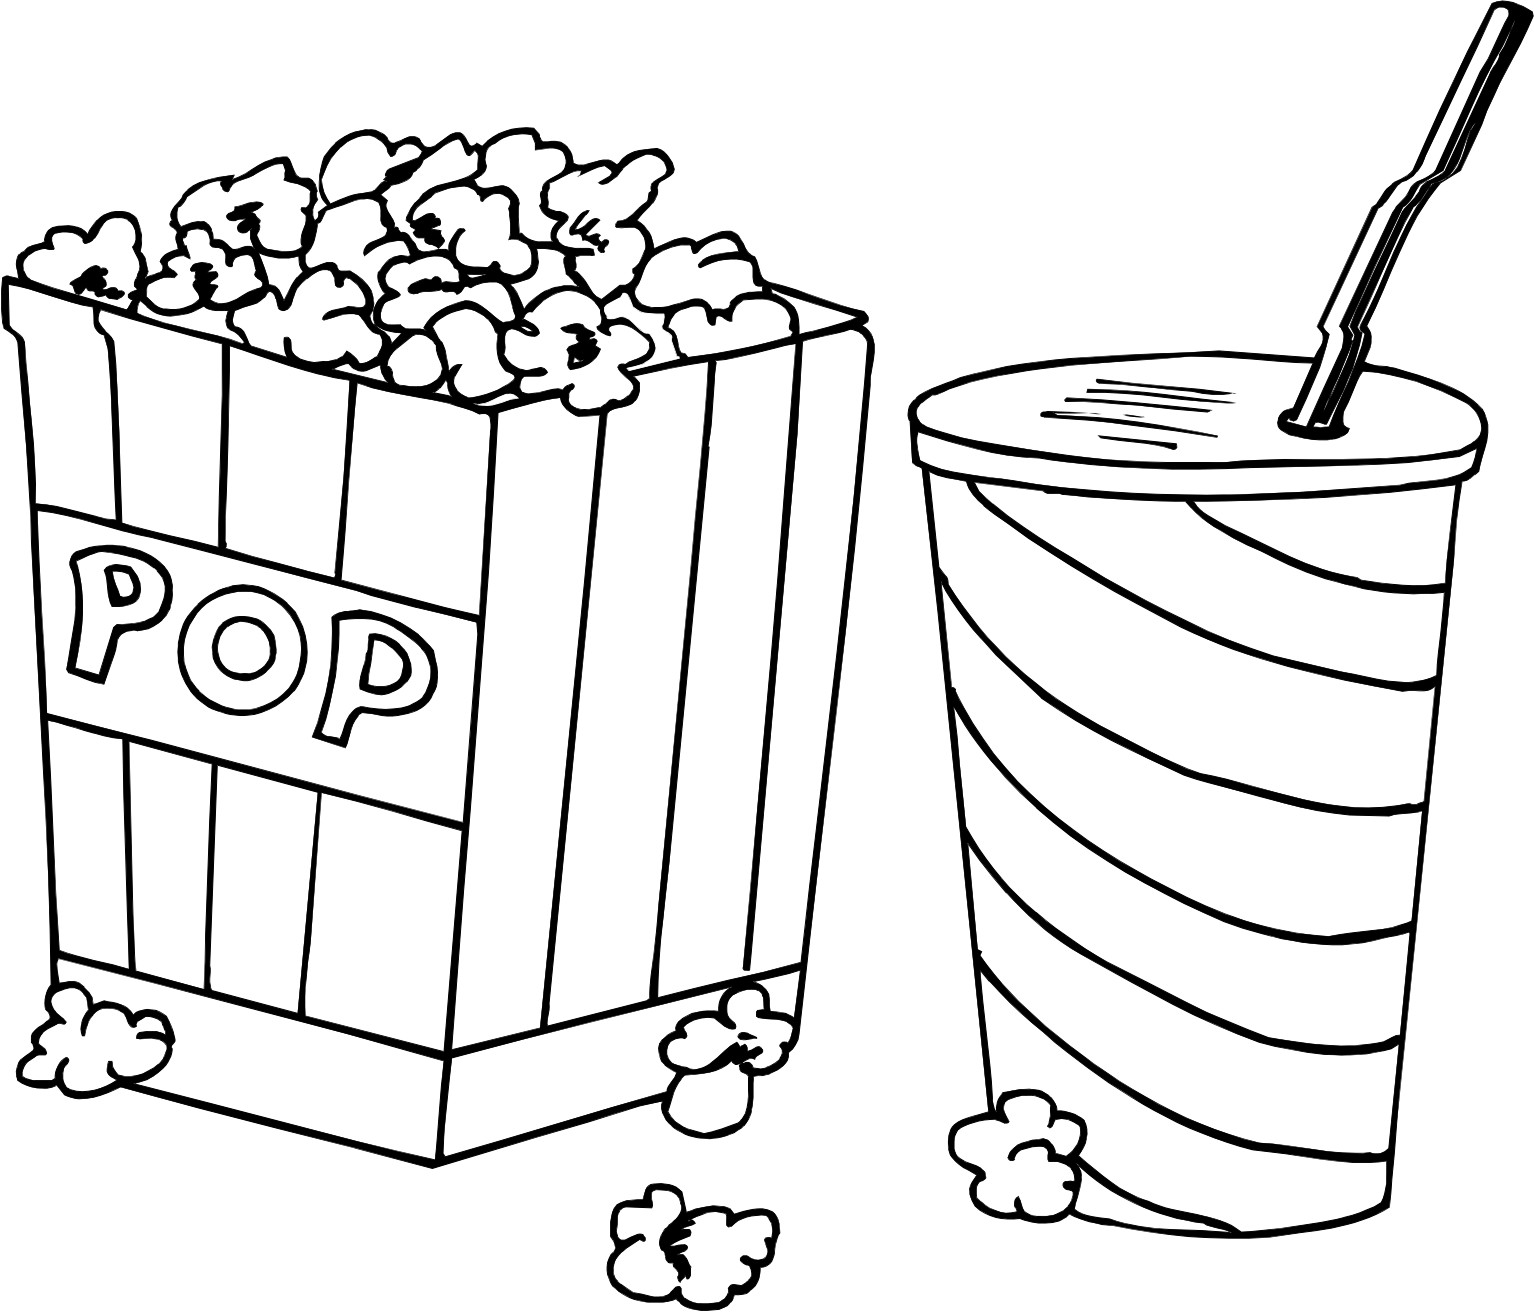 Popcorn Coloring Pages
 Food Coloring Pages – Children s Best Activities